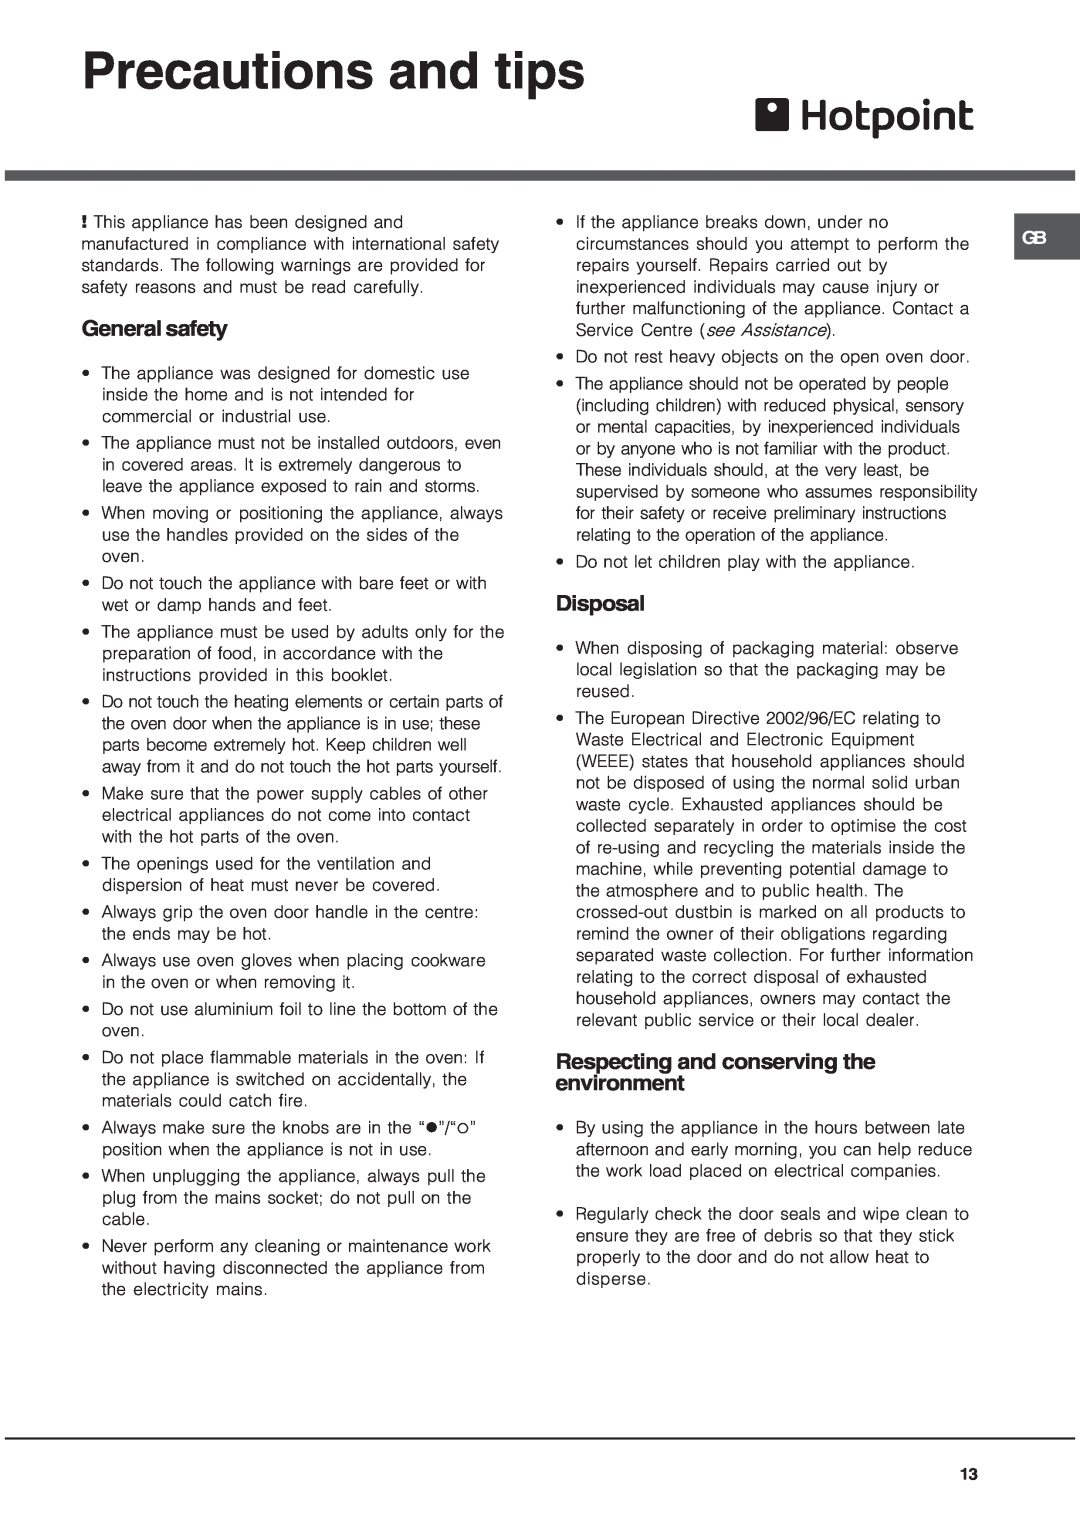 Hotpoint OS 897D C IX manual Precautions and tips, General safety, Disposal, Respecting and conserving the environment 